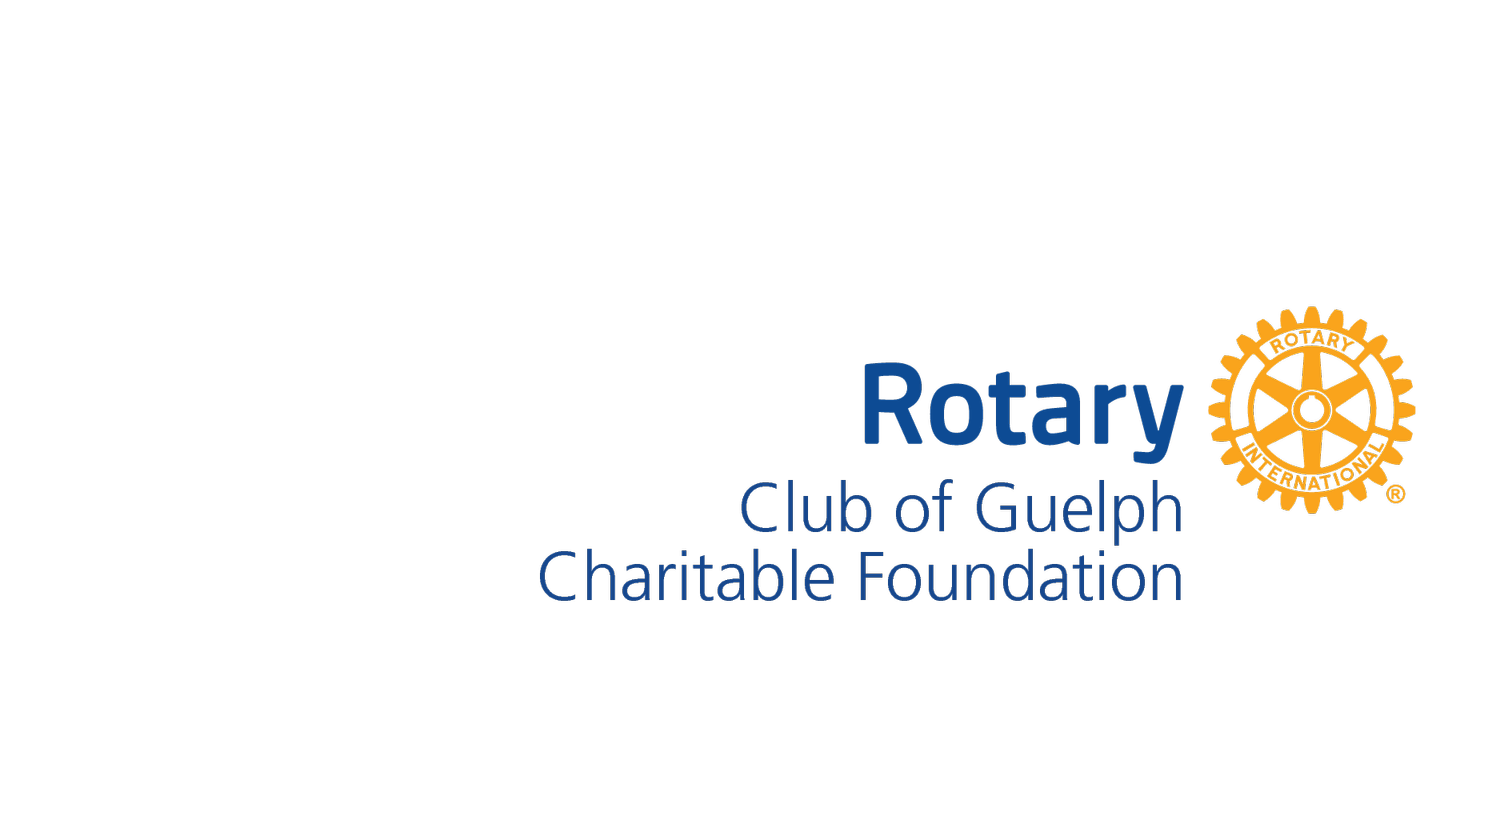 Rotary Club of Guelph Charitable Foundation